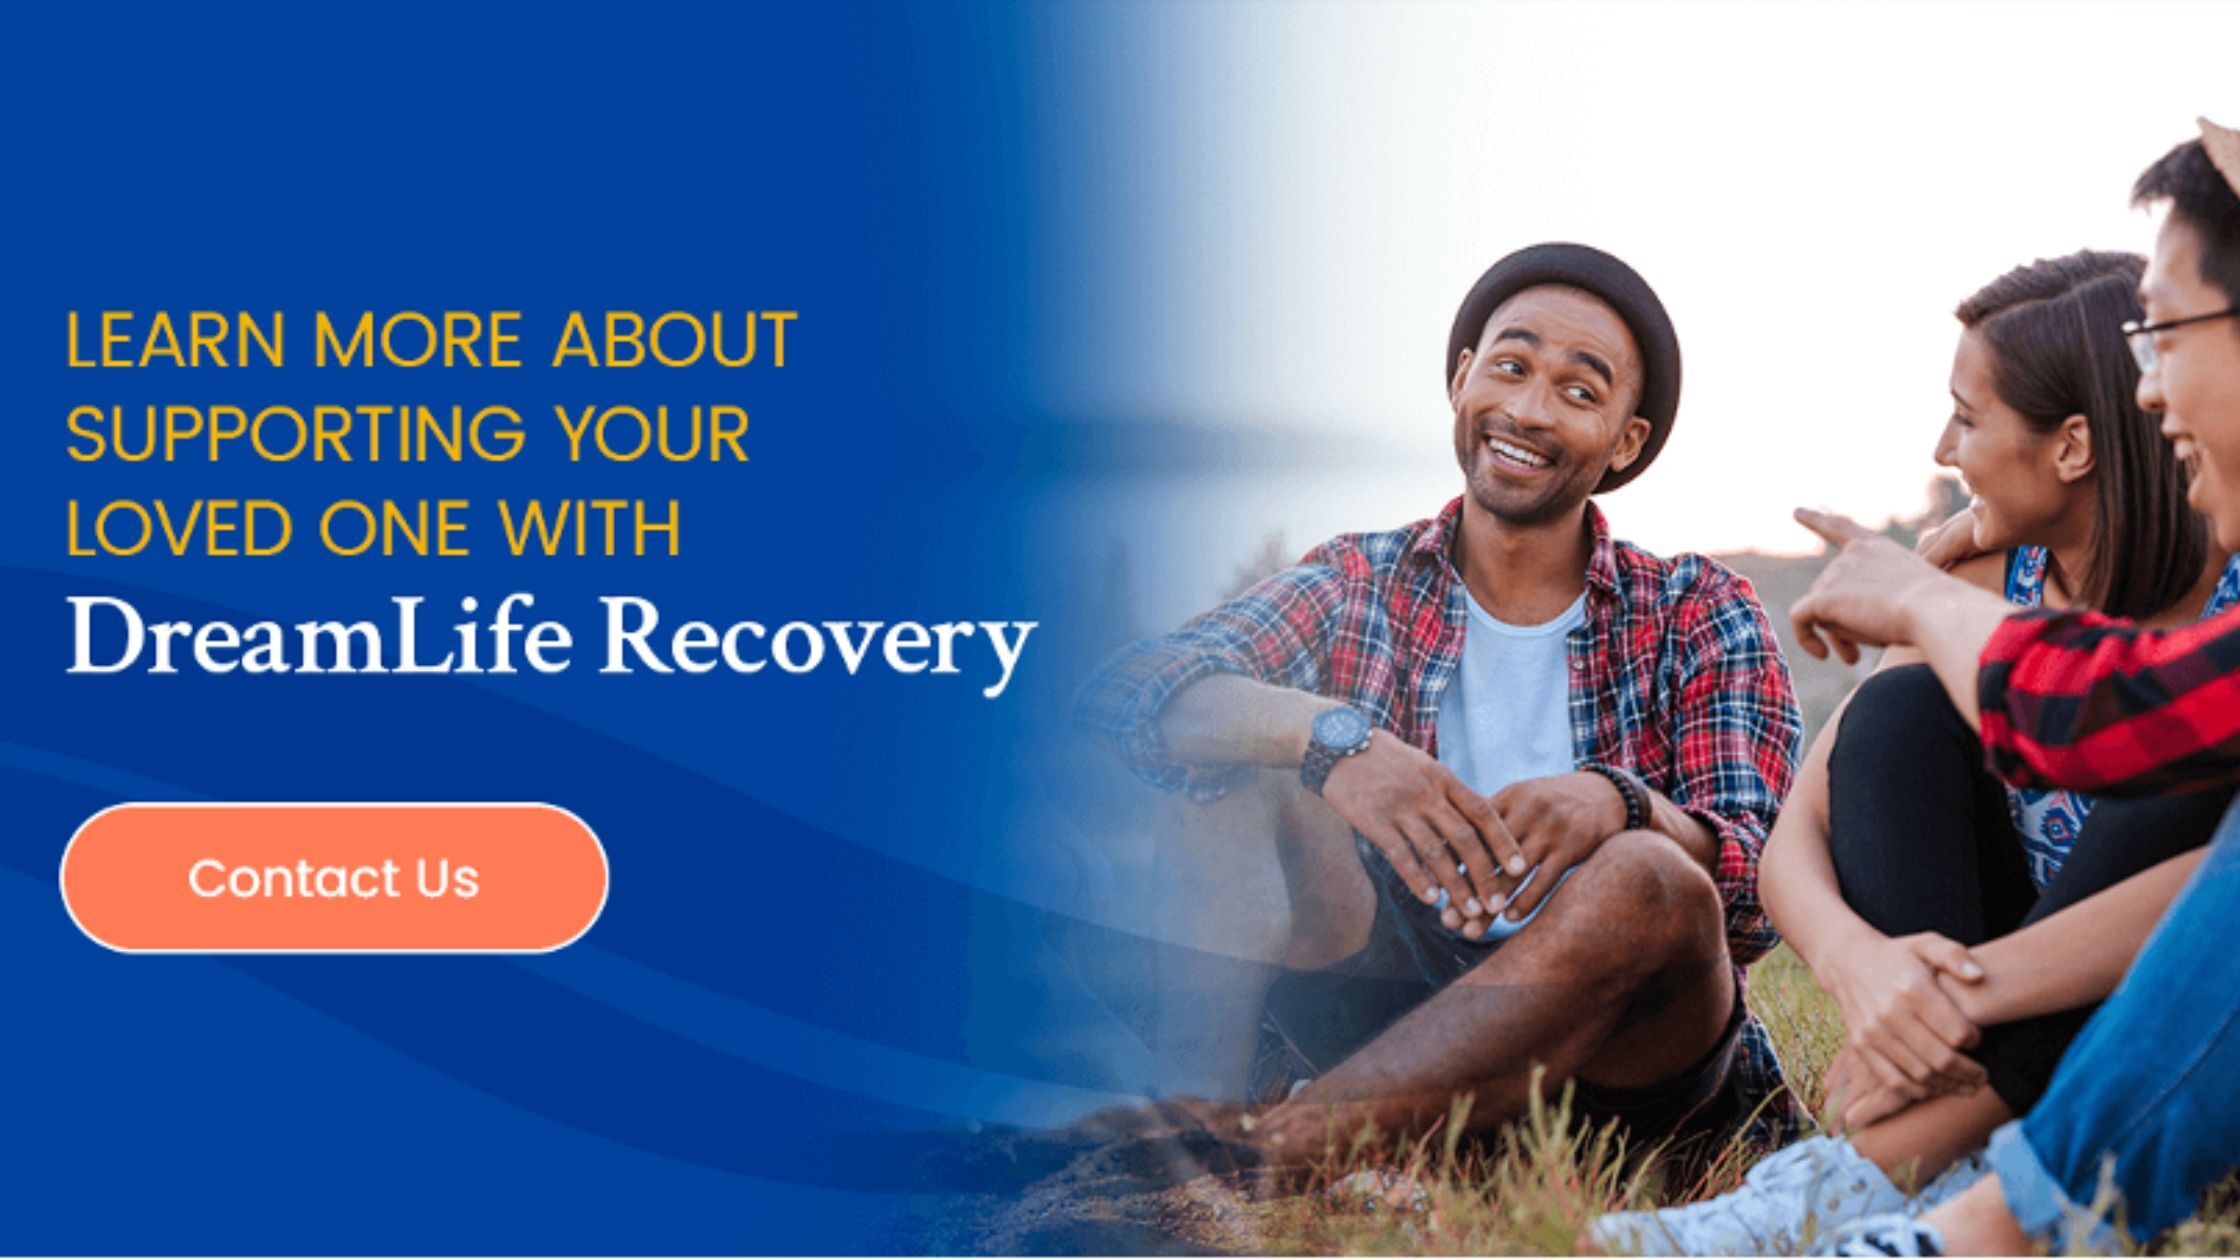 Contact Dreamlife Recovery